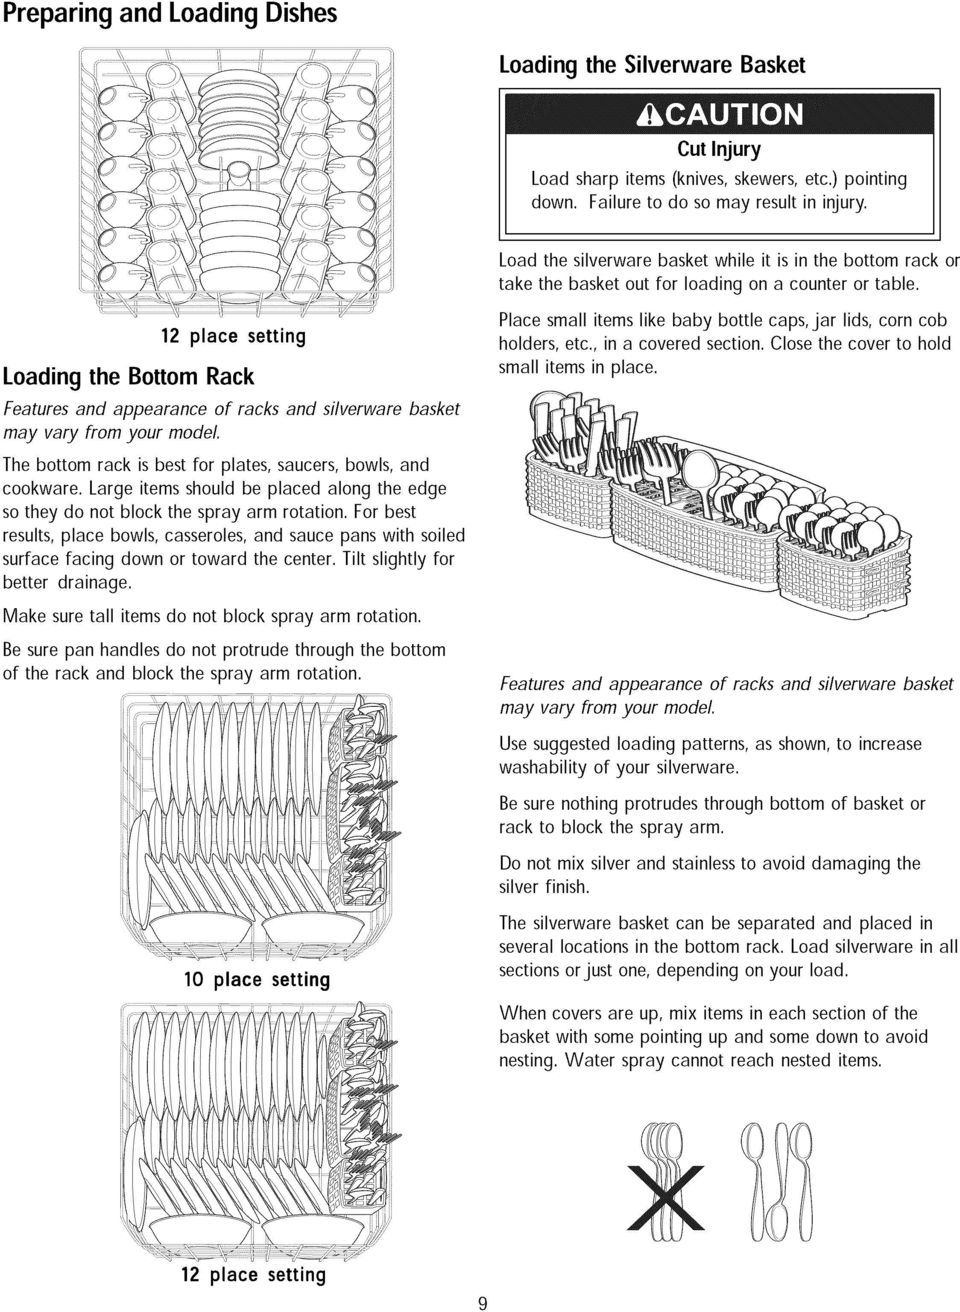 12 place setting Loading the Bottom Rack Features and appearance of racks and silverware basket may vary from your model. Place small items like baby bottle caps, jar lids, corn cob holders, etc.